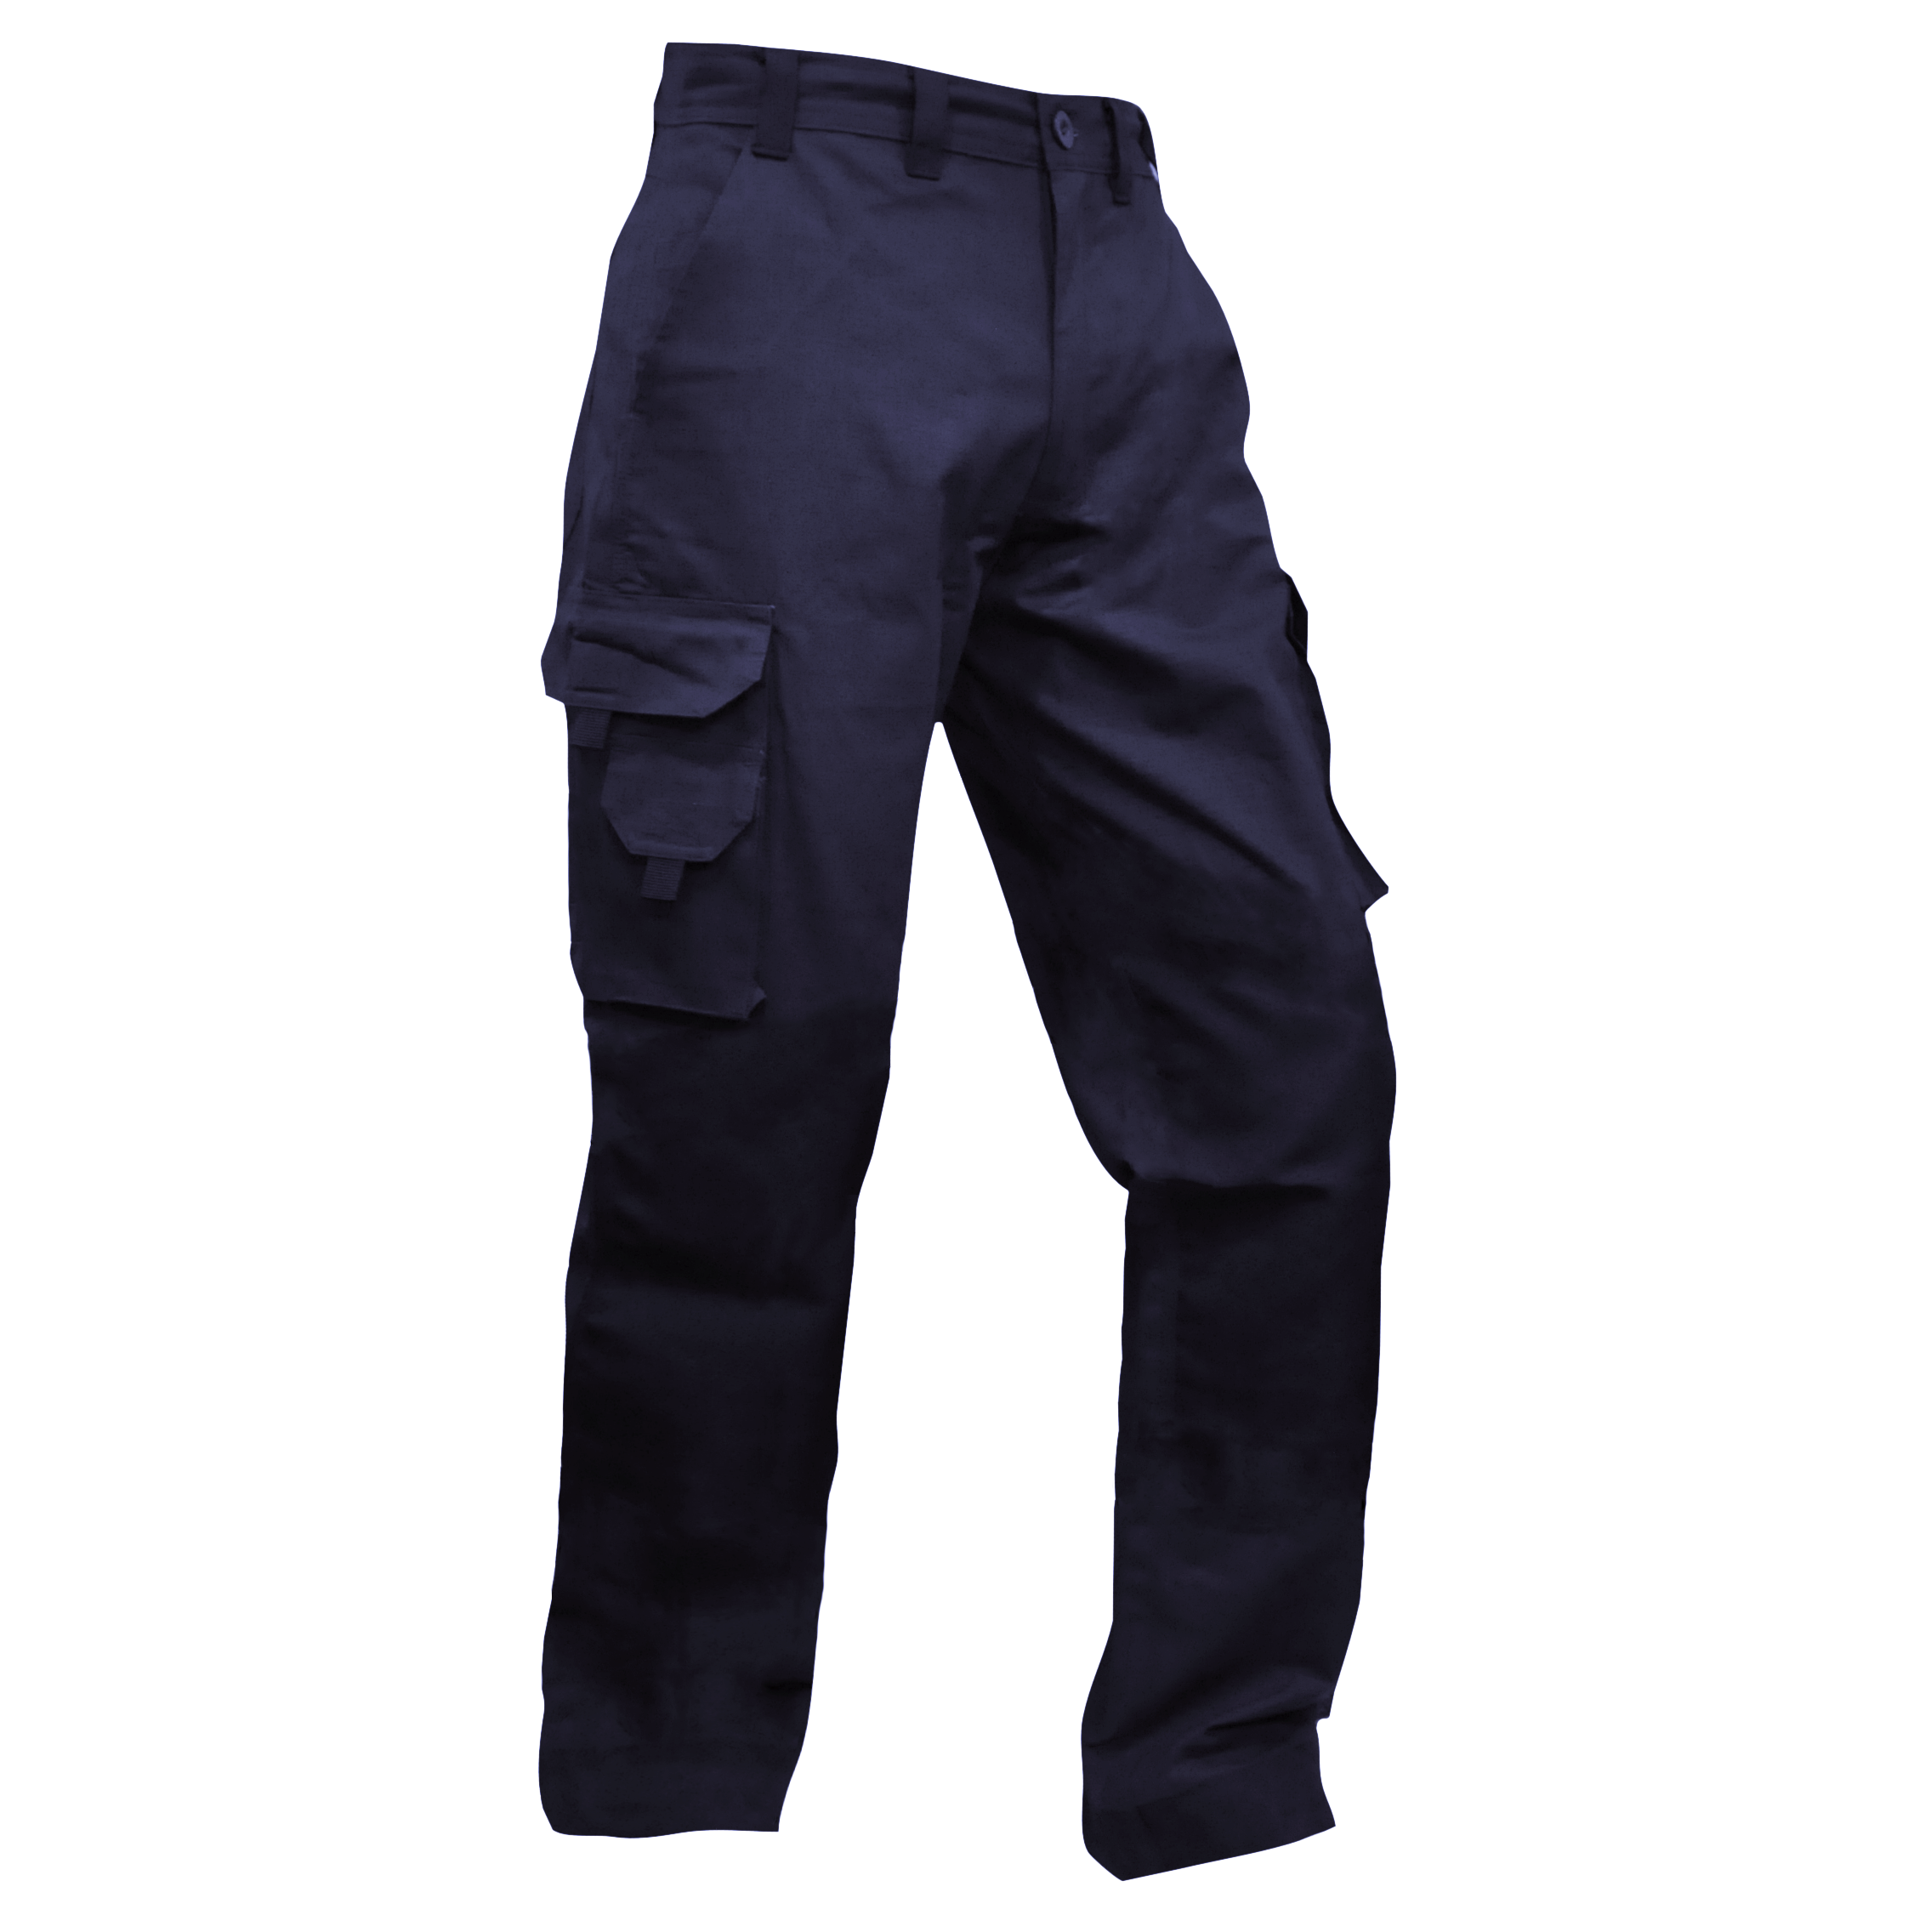 Safe-t-tec Navy Ripstop Cotton Cargo Pants - Everything Workwear & Safety